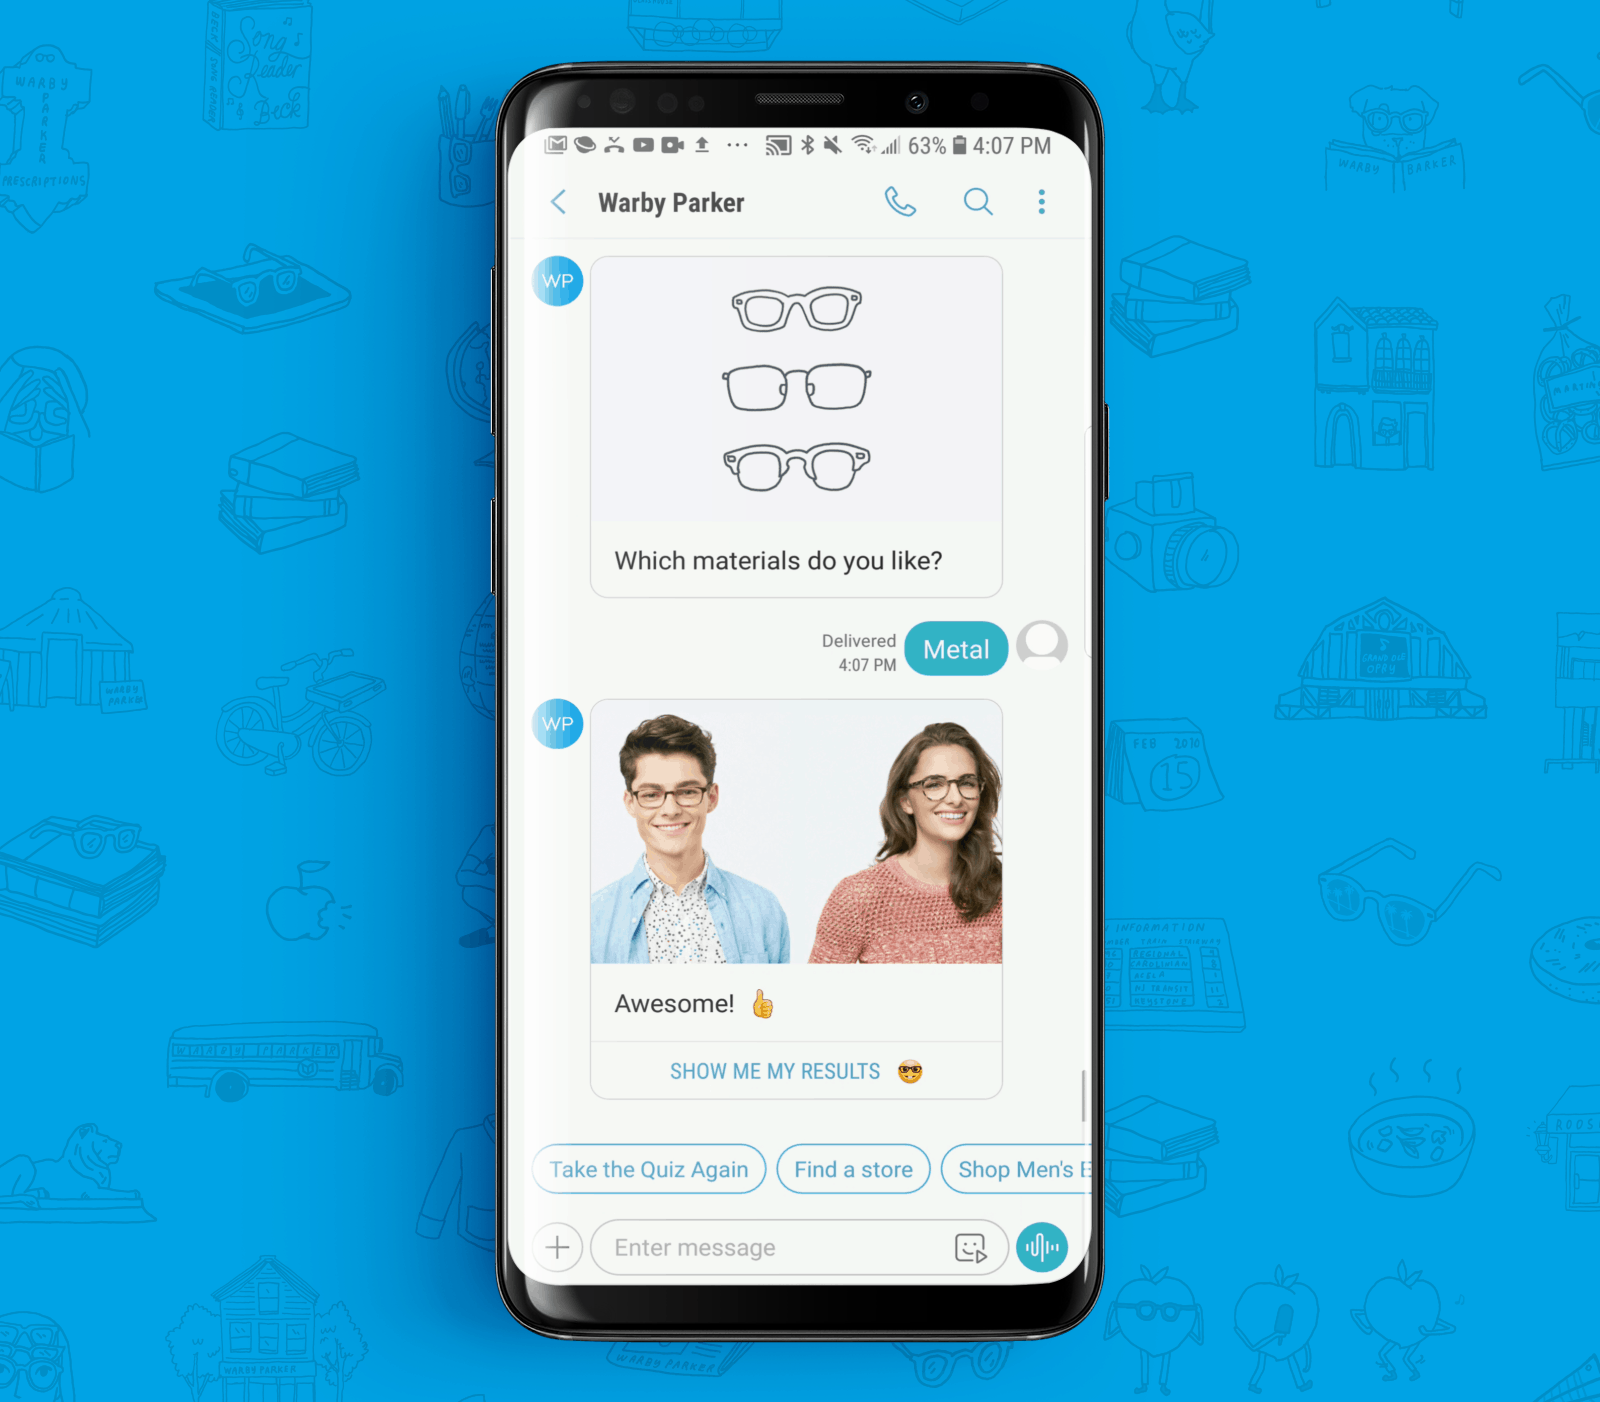 RCS Business Messaging Example from Warby Parker 5